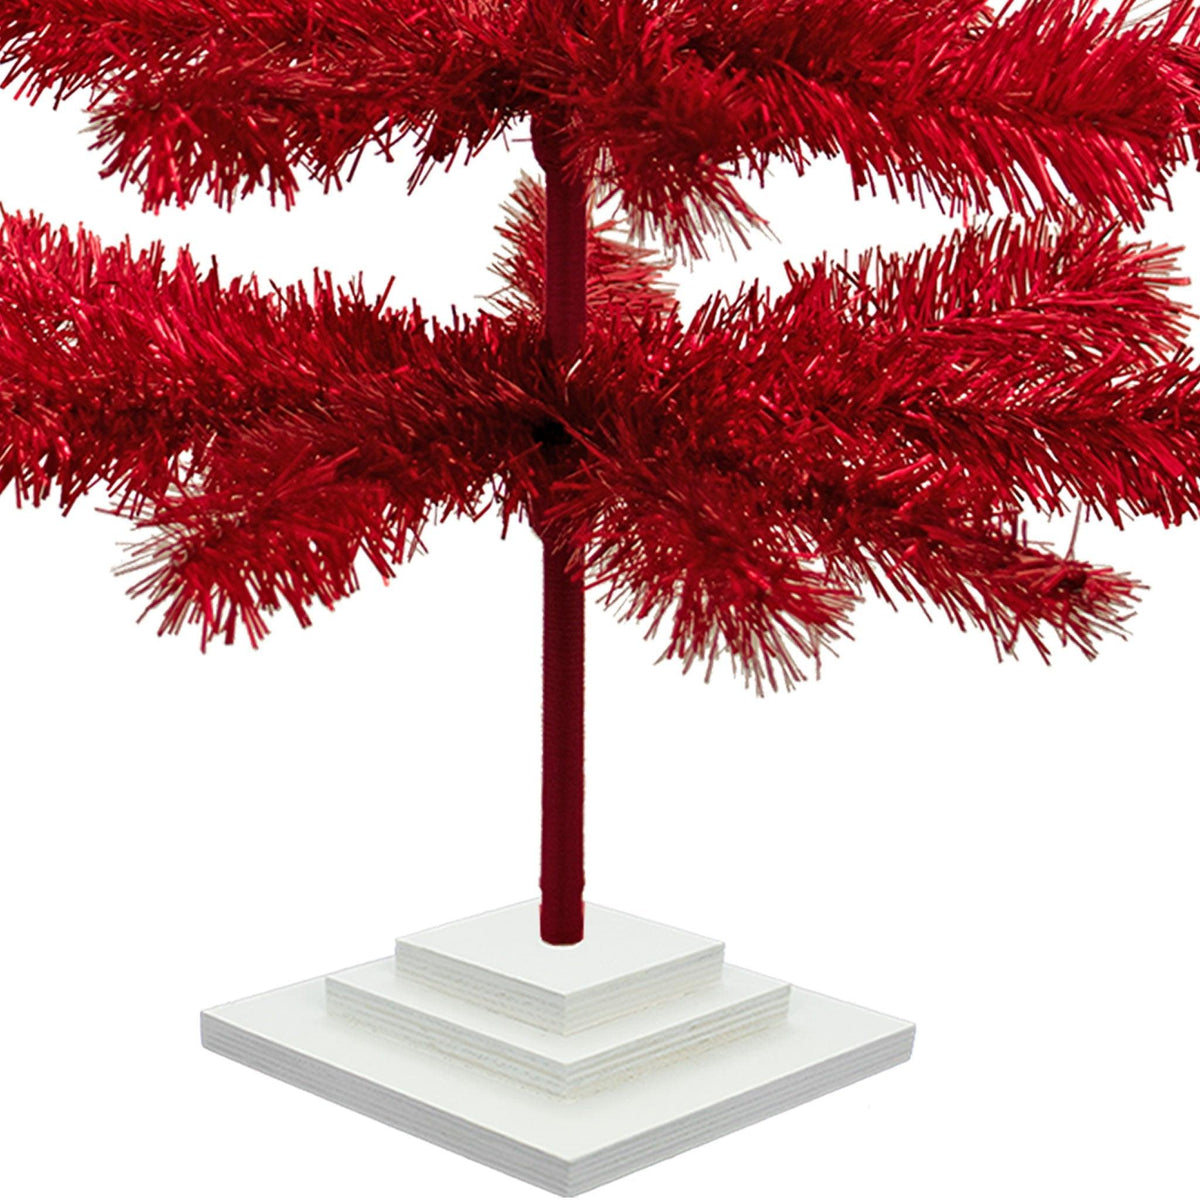 48in Red trees comes with a 3-tiered white wood stand that is easy to detach and secures the trees upright